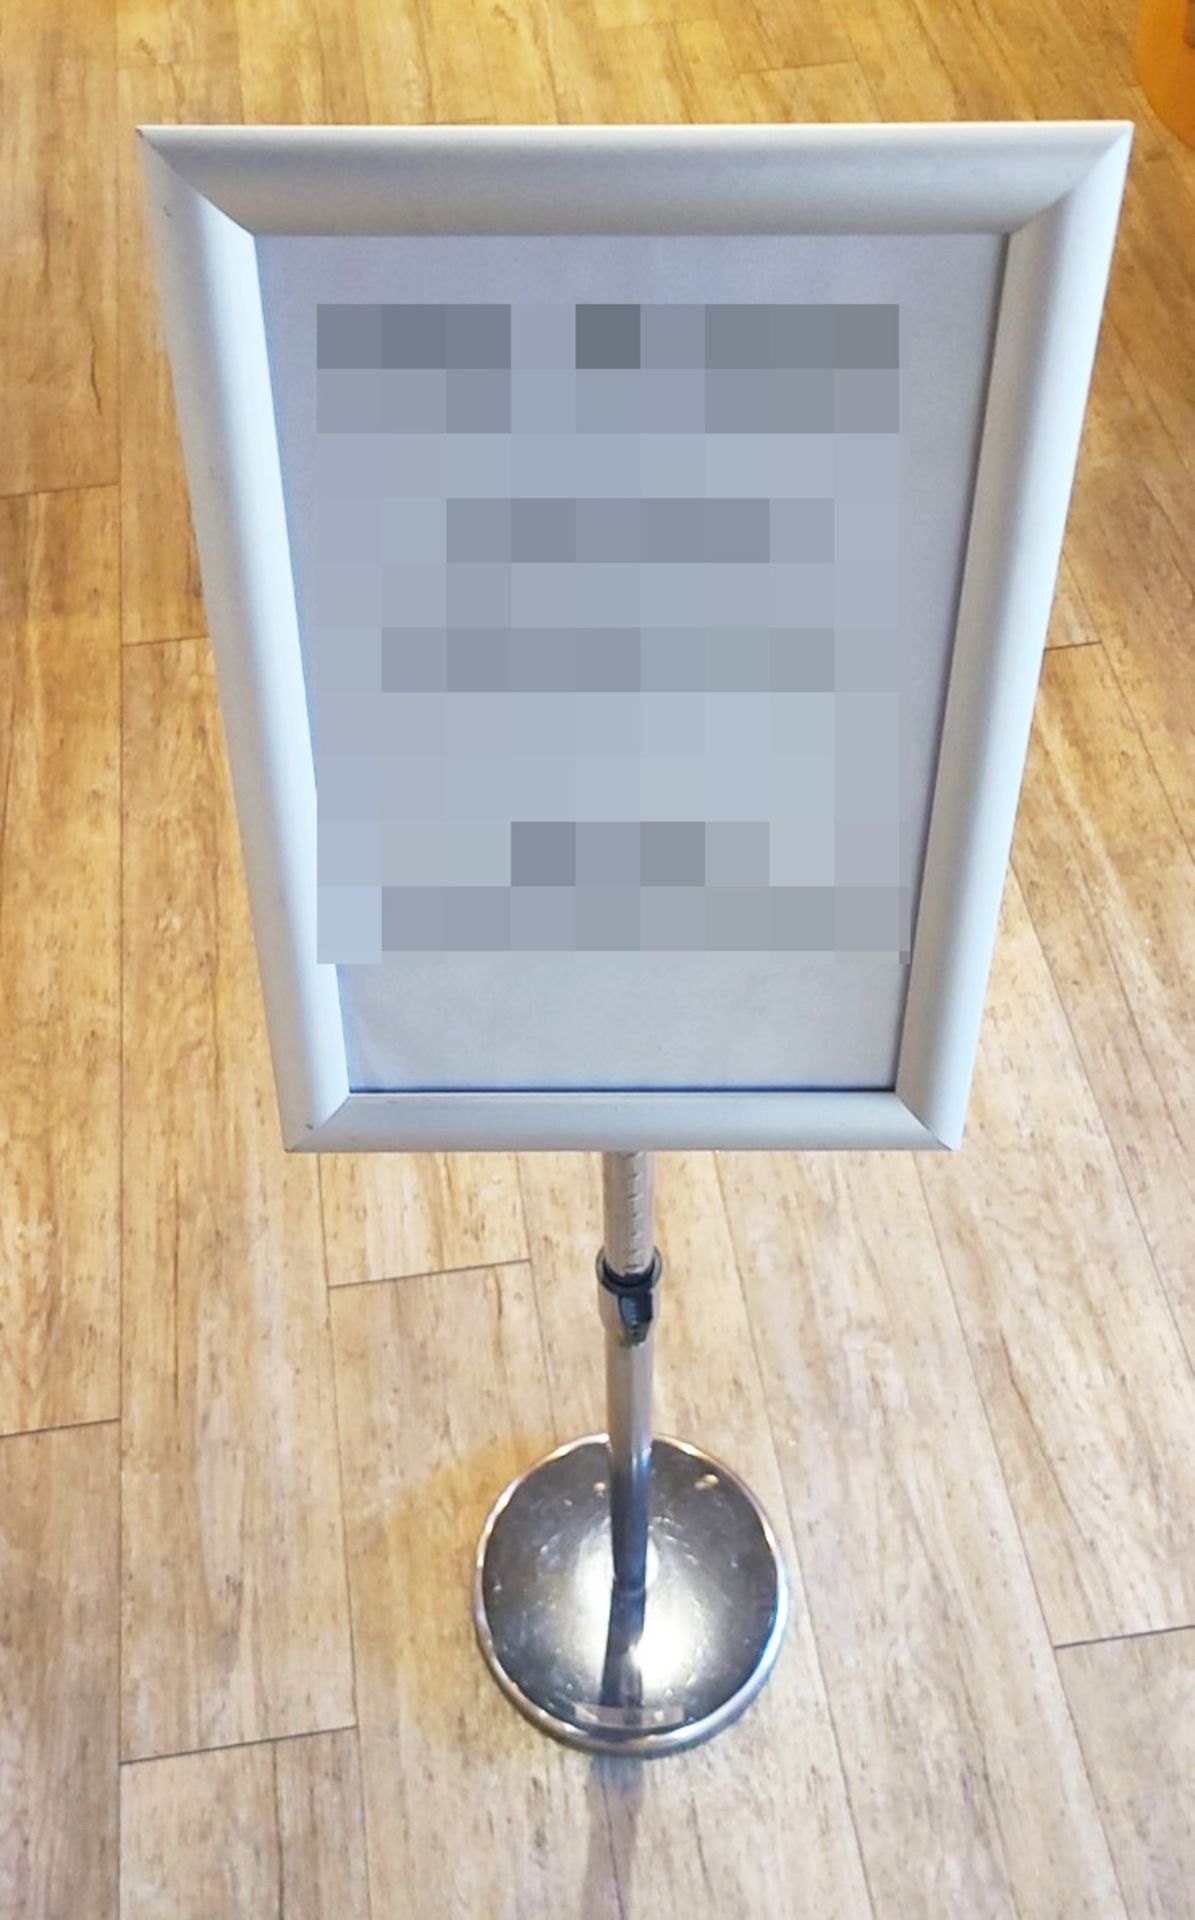 1 x A4 Aluminum Adjustable Snap Frame Menu Sign Stand With Stable Round Base - Image 2 of 3